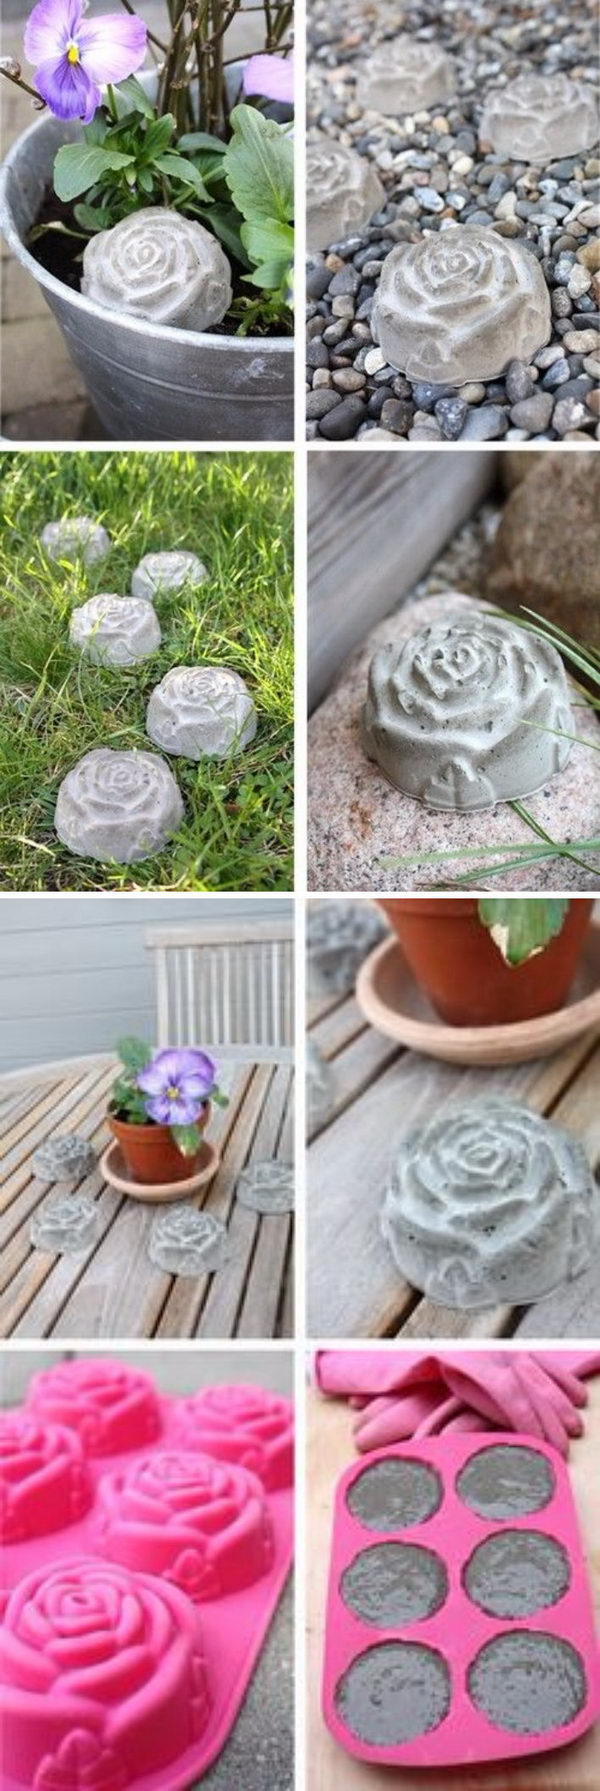 20+ Concrete DIY Projects to Beautify Your Garden 20